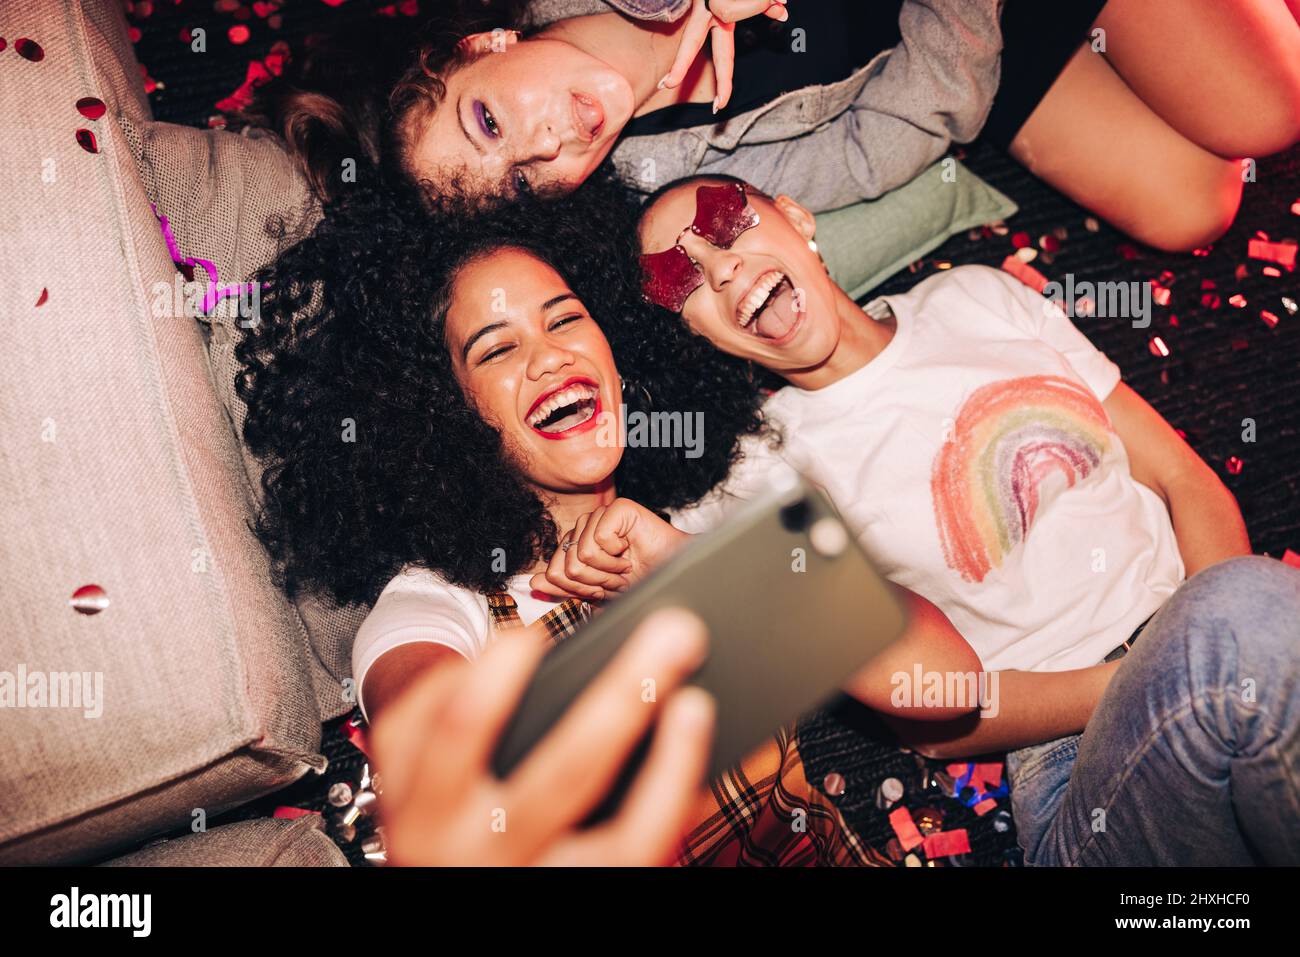 Vibrant selfies for vibrant people. Overhead view of three happy friends taking a selfie while lying on the floor at a house party. Group of cheerful Stock Photo